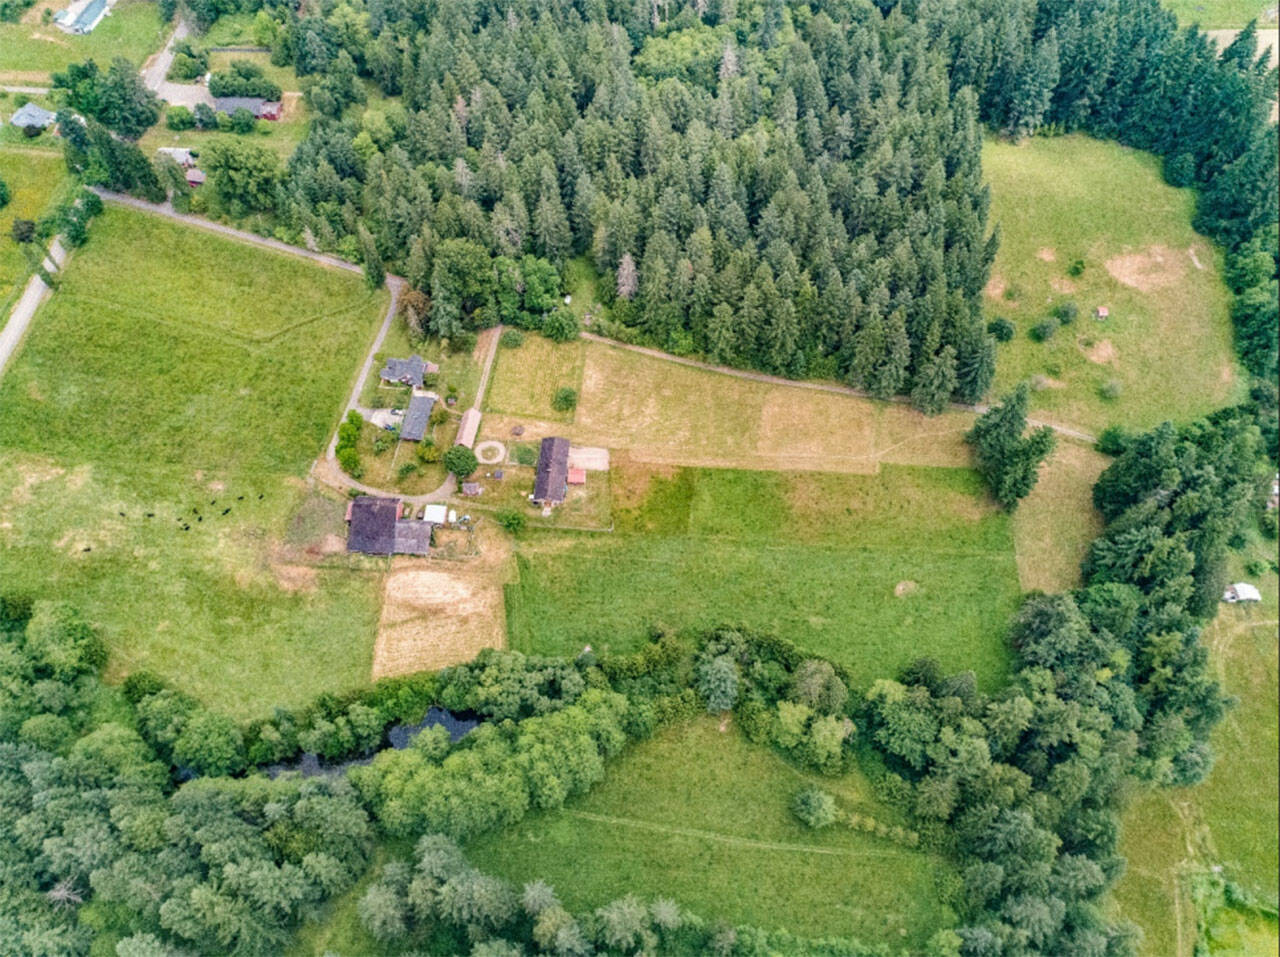 Aerial image of Royal Valley Farm and area of rezone. Courtesy photos